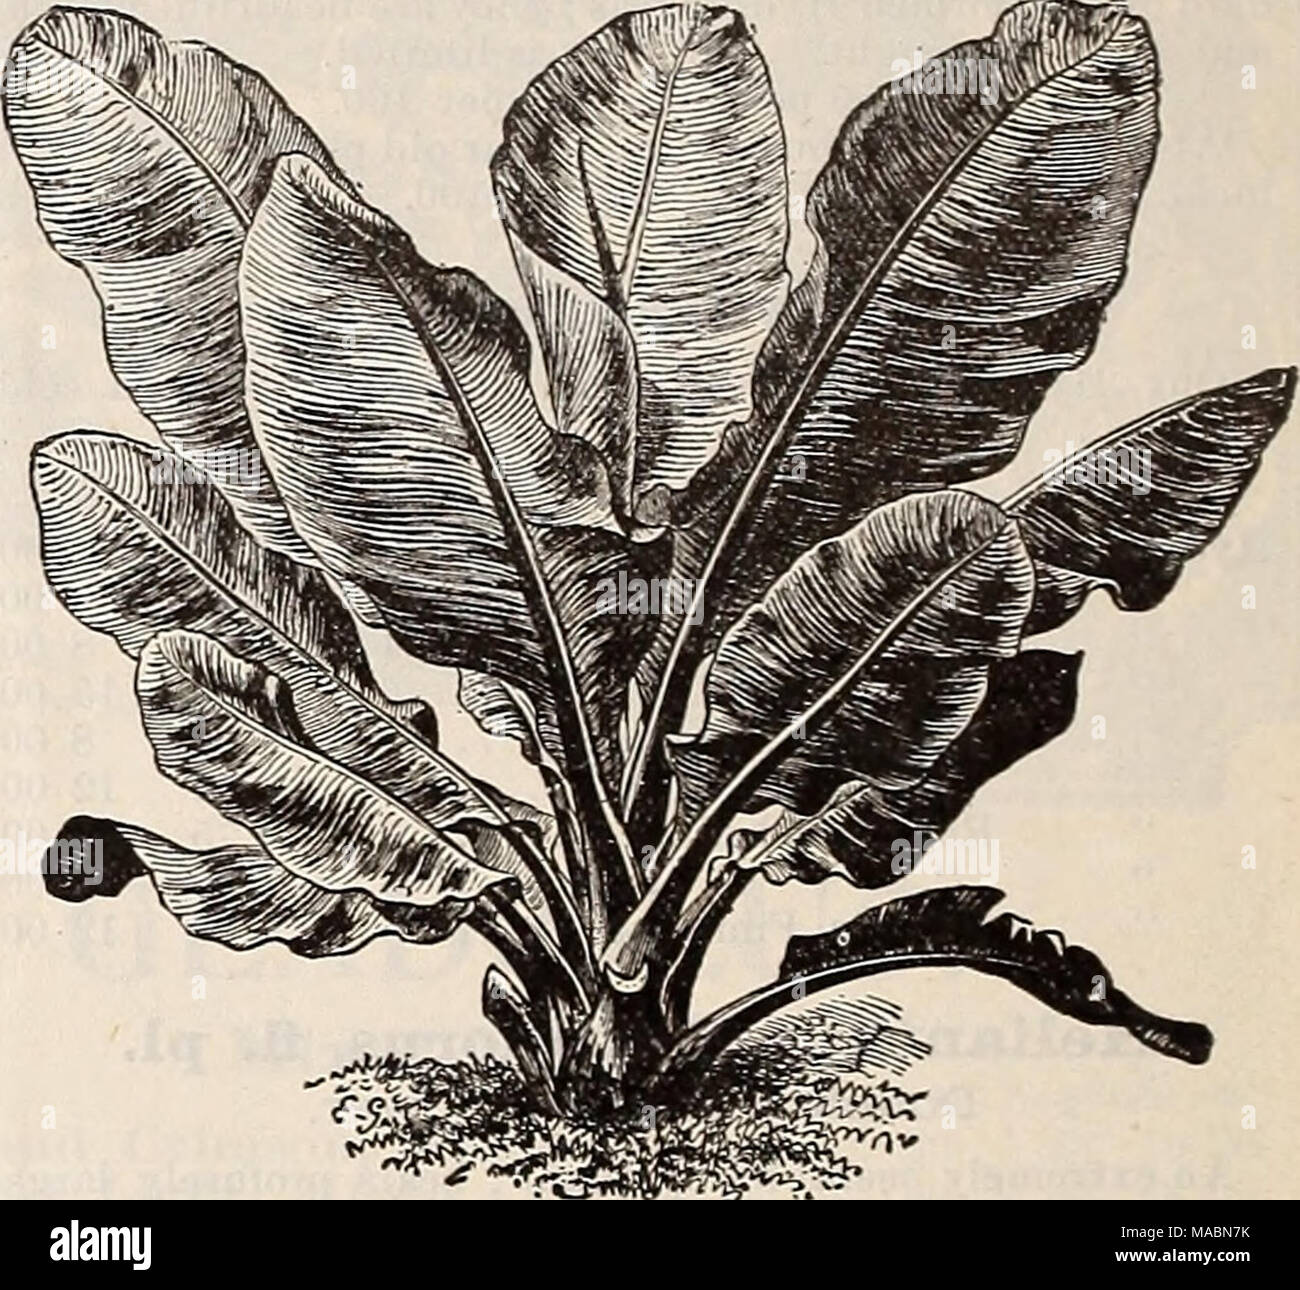 . Dreer's quarterly wholesale price list of seeds, plants &amp;c. : spring edition April 1896 June . Lychnis, Plenissima Sempekflorens. MUSA ENSETE. Mnsa Ensete. Abyssinian Banana. The leaves of this magnificent plant are long, broad and massive, of a beautiful green, with a broad crimson midrib ; the plant grows luxuriantly from 8 to 12 feet high, producing a tropical effect. Strong 5 inch pots, 50 cents each. Otaheite Orange. We offer a fine lot of these in strong plants, which should fruit freely the coming season. Strong 4 inch pots, $3.50 per doz. &quot; 5 inch pots, $5.00 per doz. &quot; Stock Photo